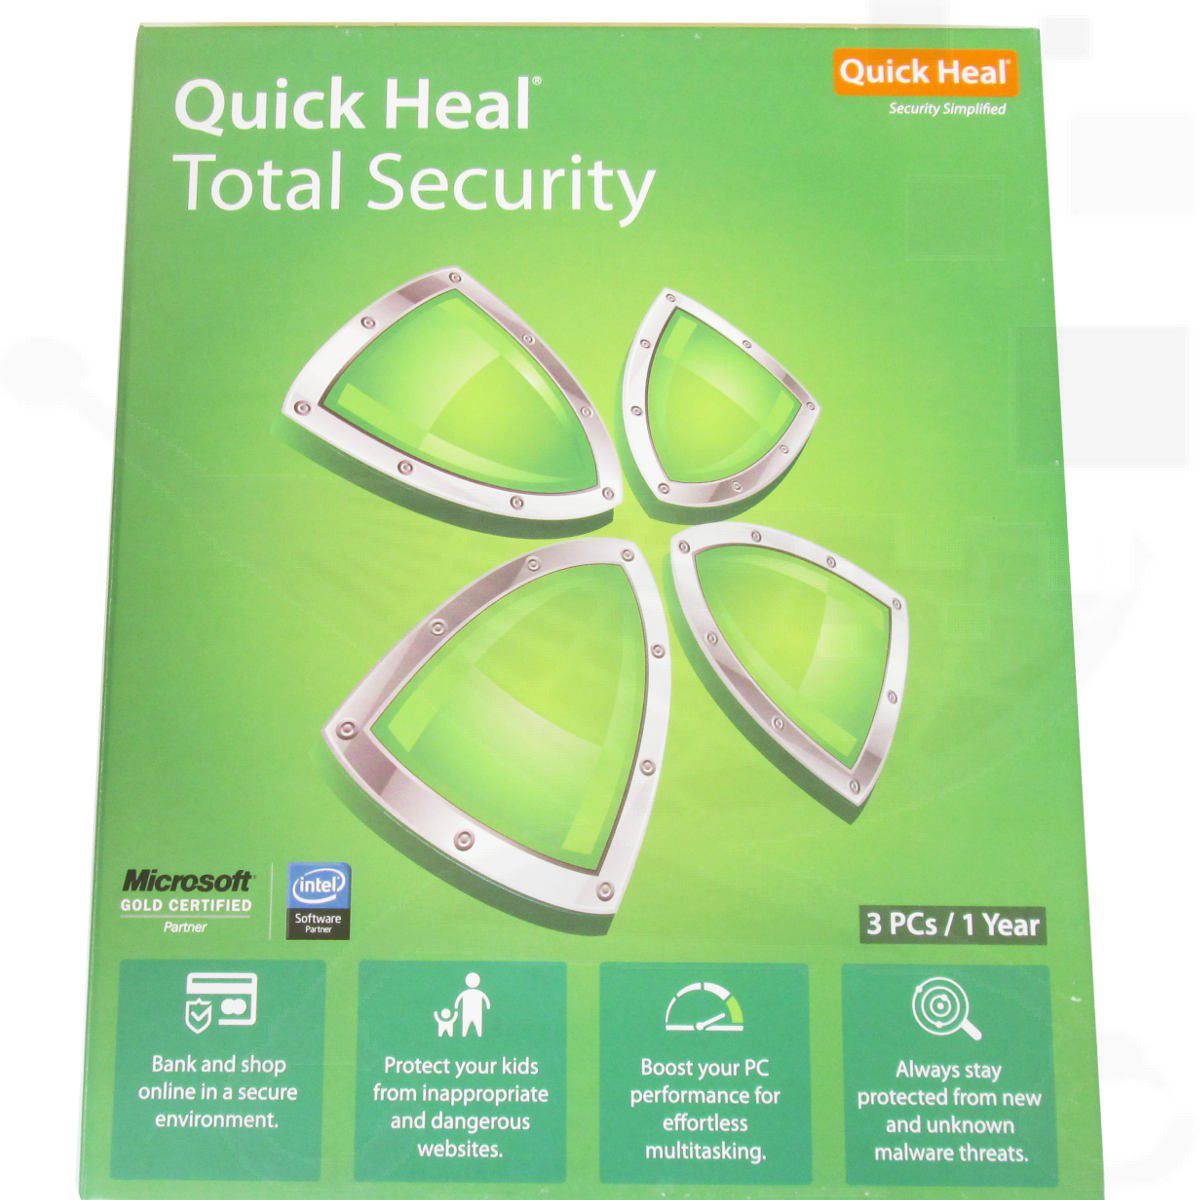 Product key for quick heal